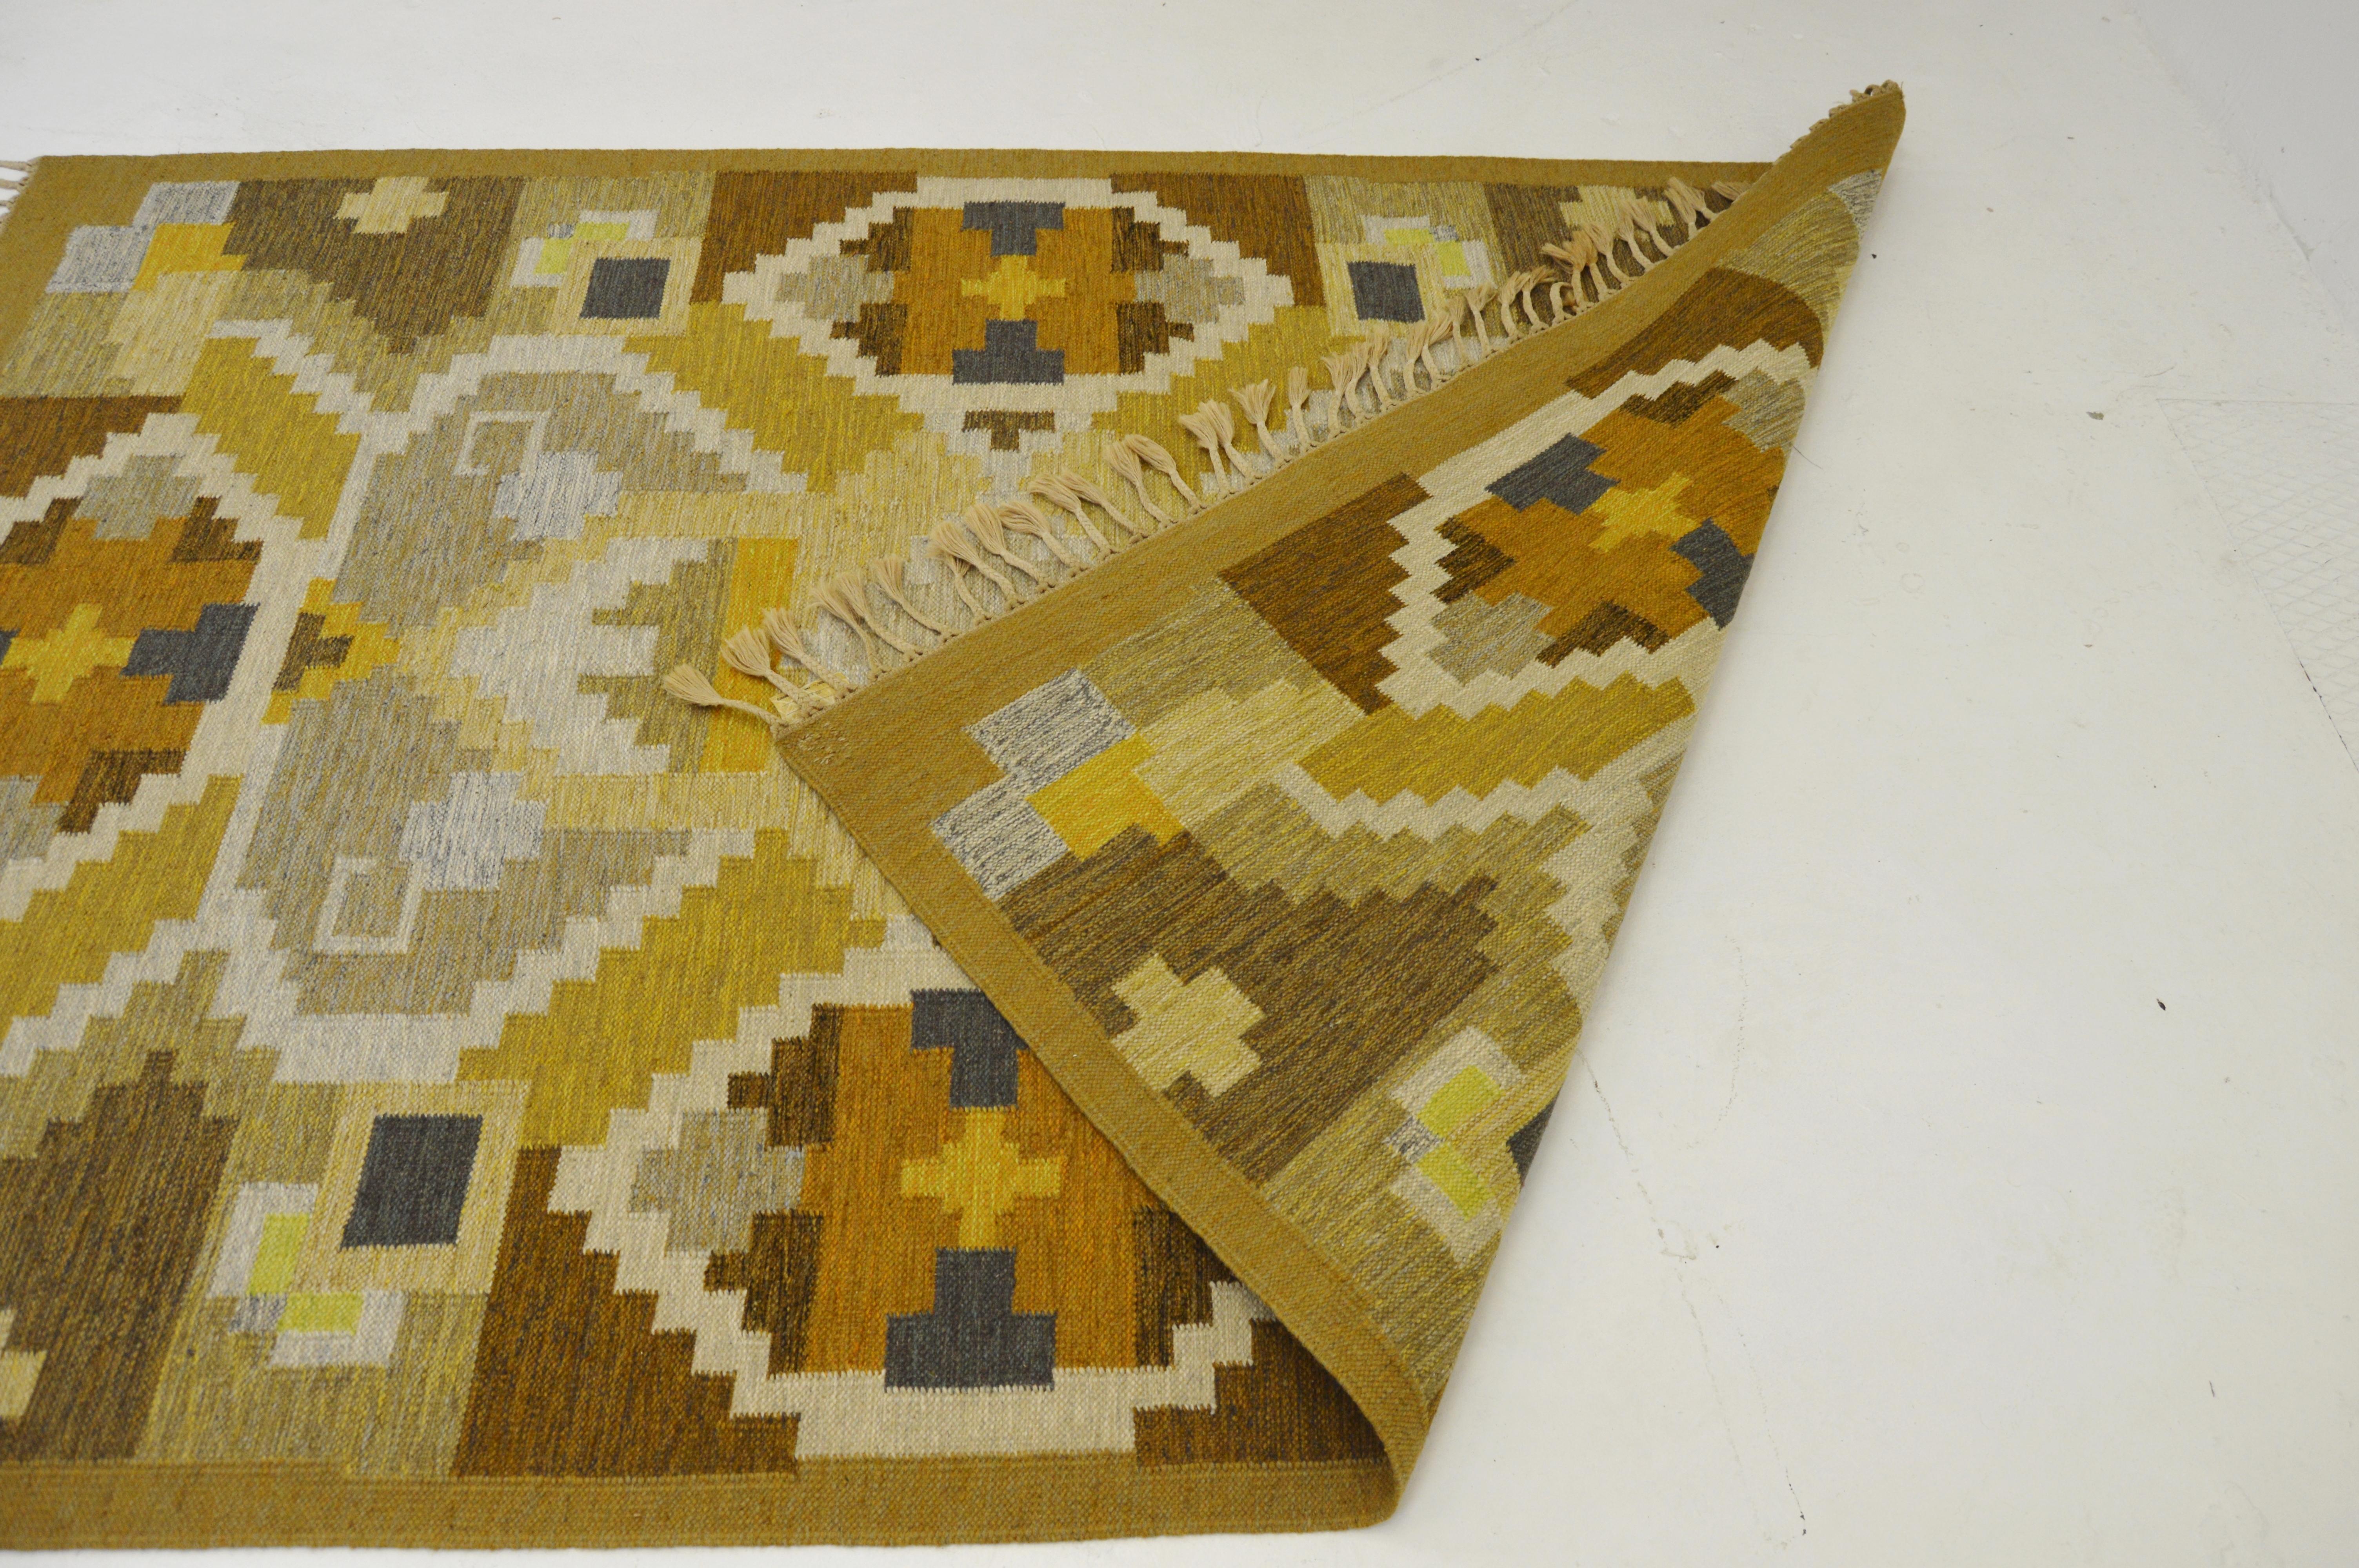 A Scandinavian Modern Rollakan flat-woven carpet.
Made in Sweden during the 1950- 1960s, midcentury period. Designer Ingegerd Silow, marked IS.

Handwoven wool. Different shades of light brown, yellow and grey are the dominant colors accompanied